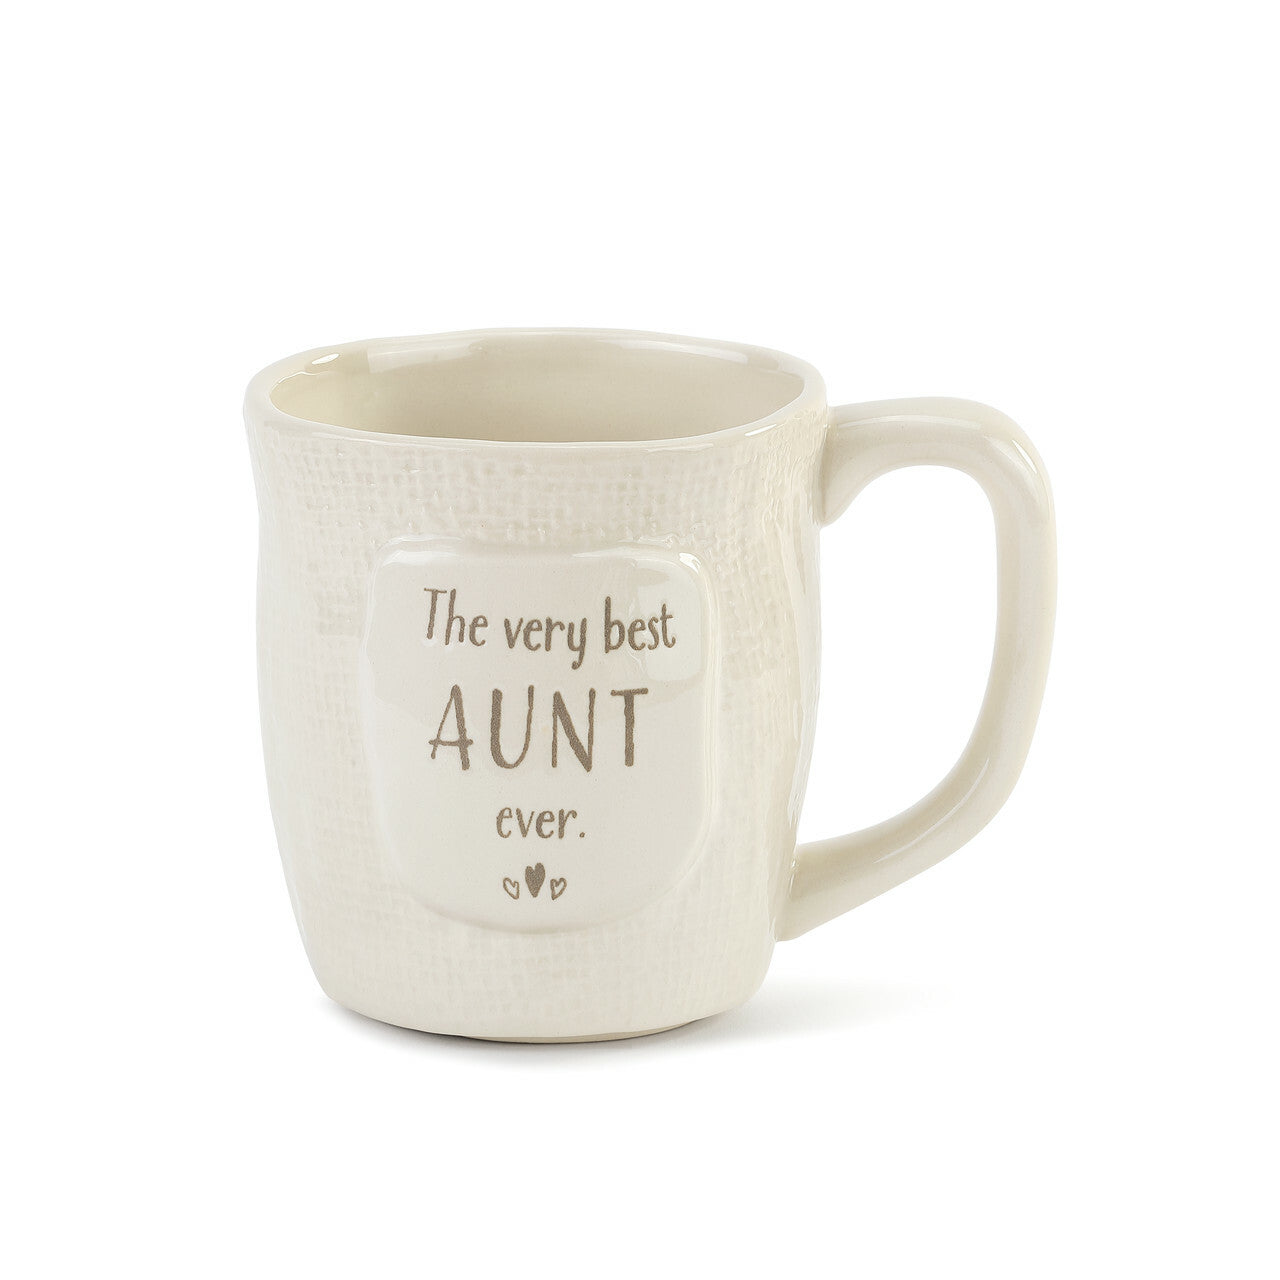 The Very Best Aunt Ever Mug